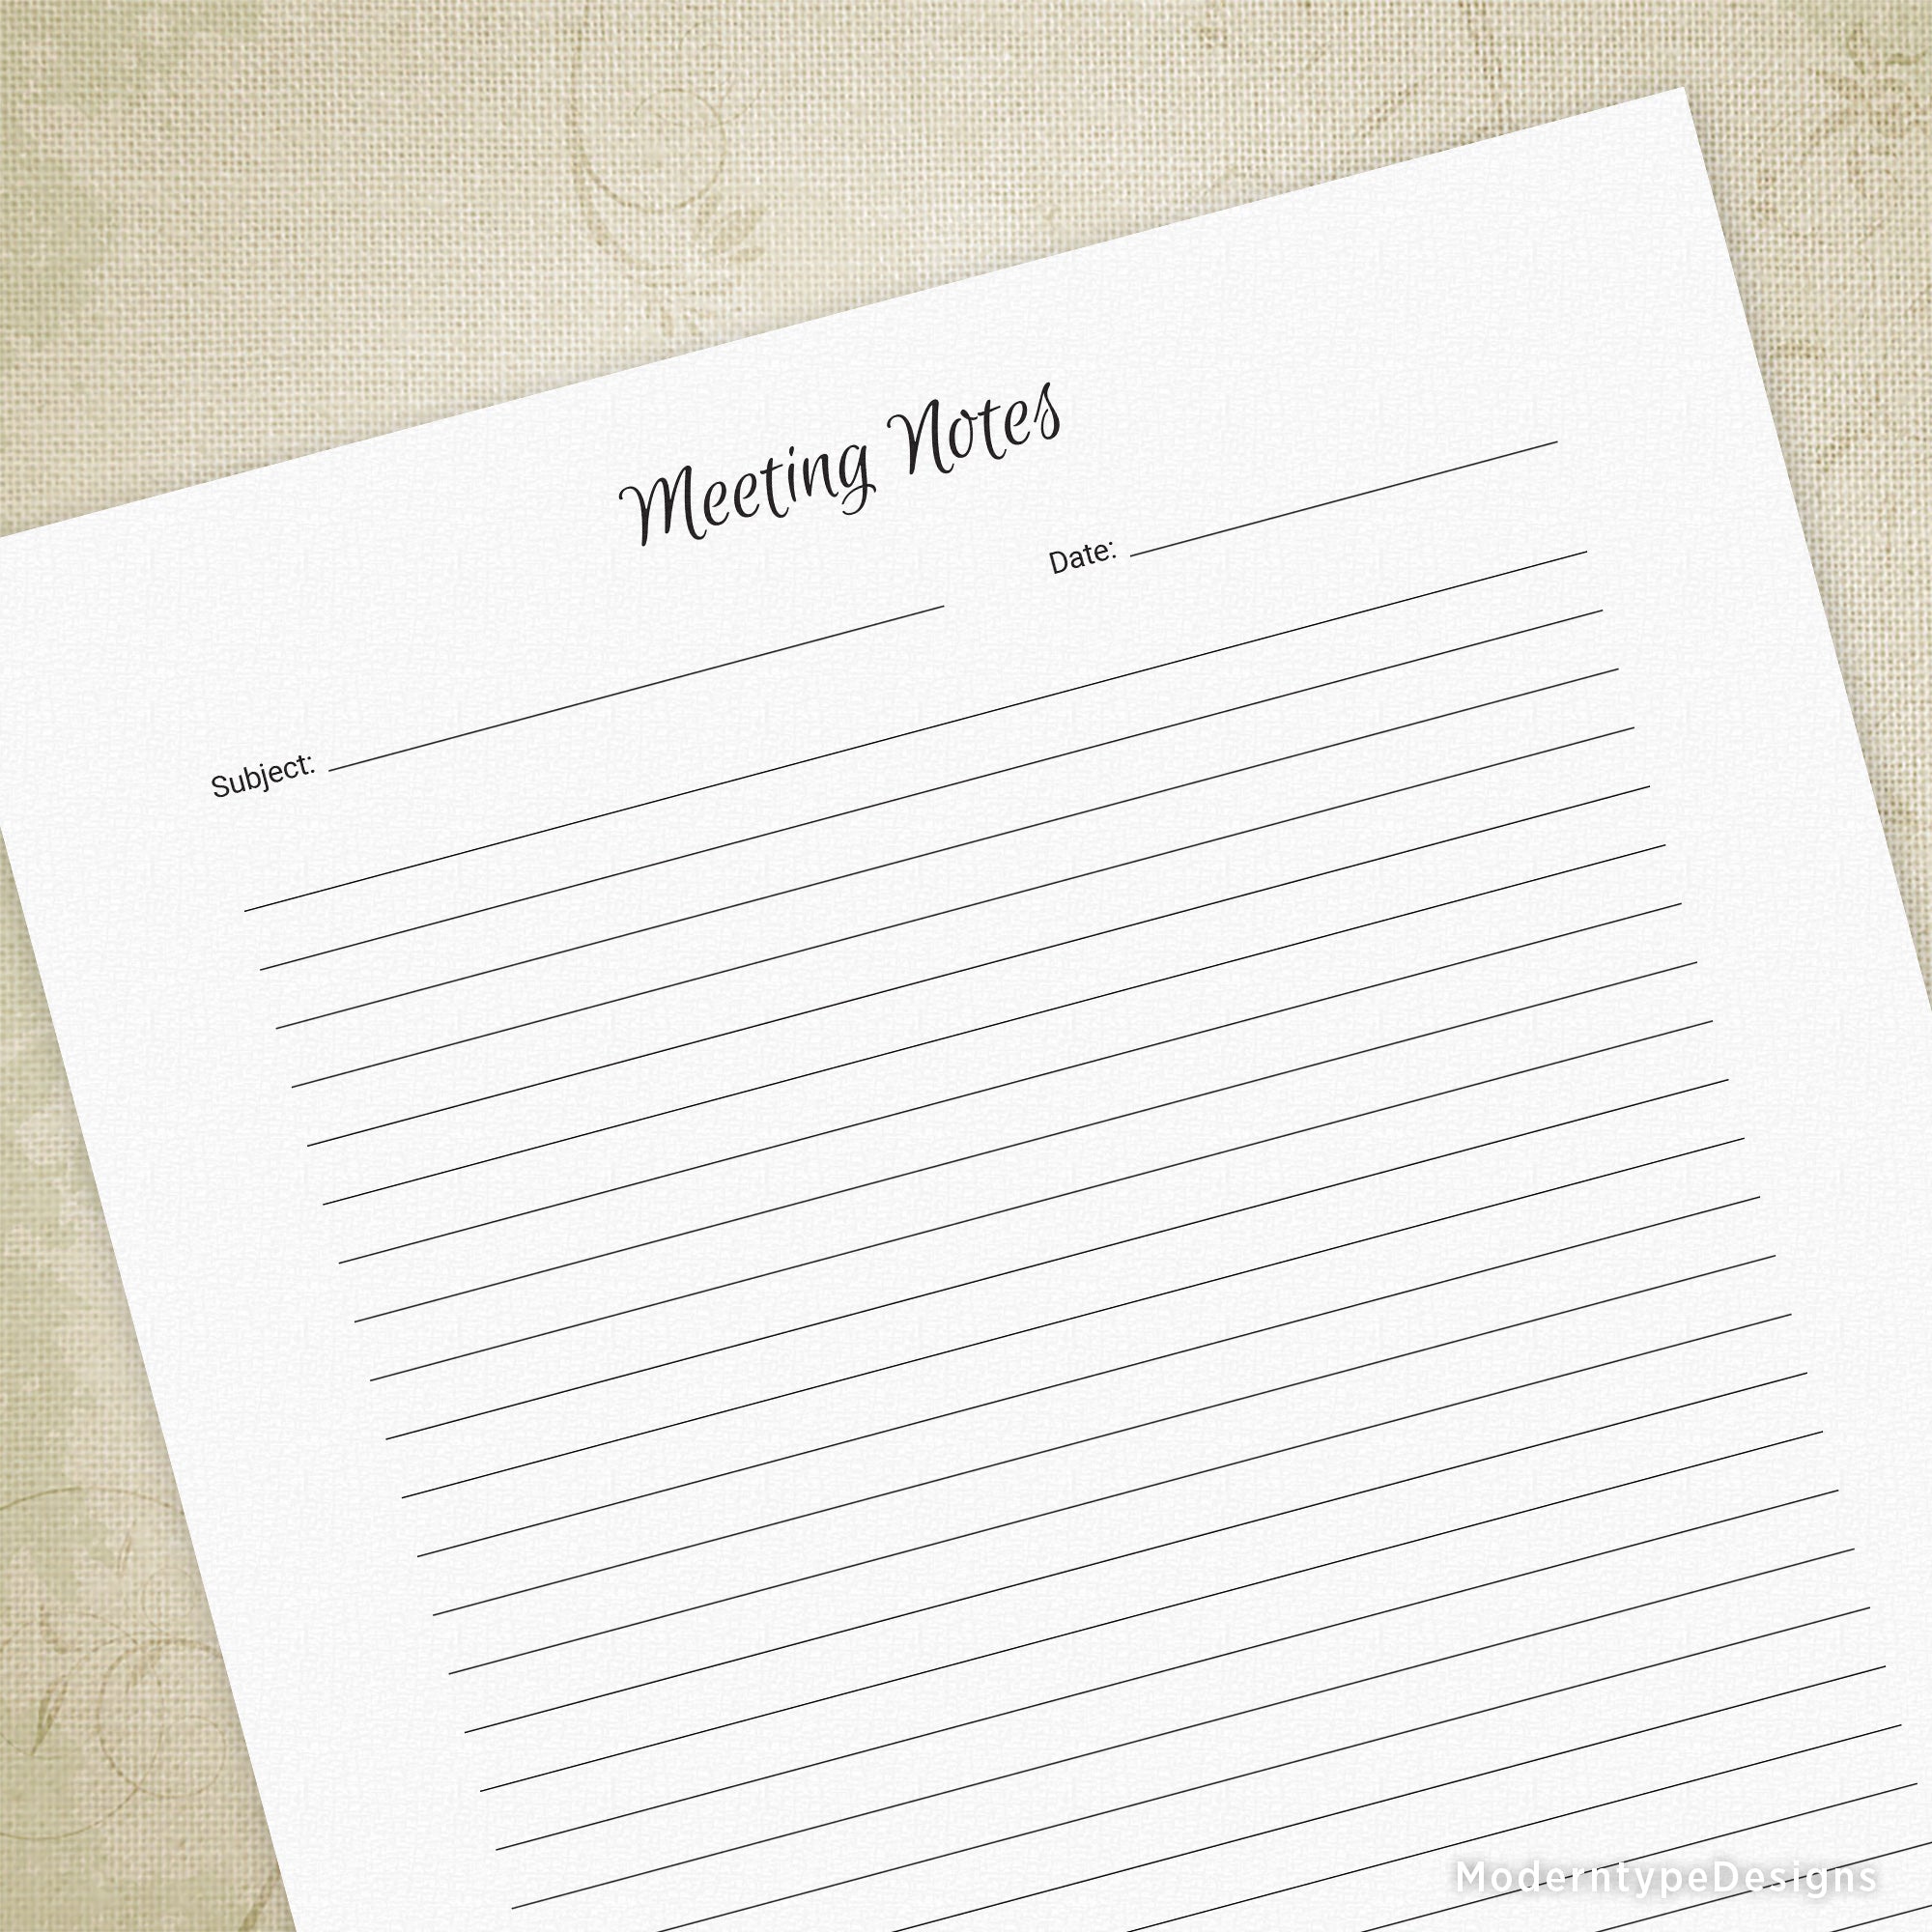 Meeting Notes Simple Planner Printable for Binding